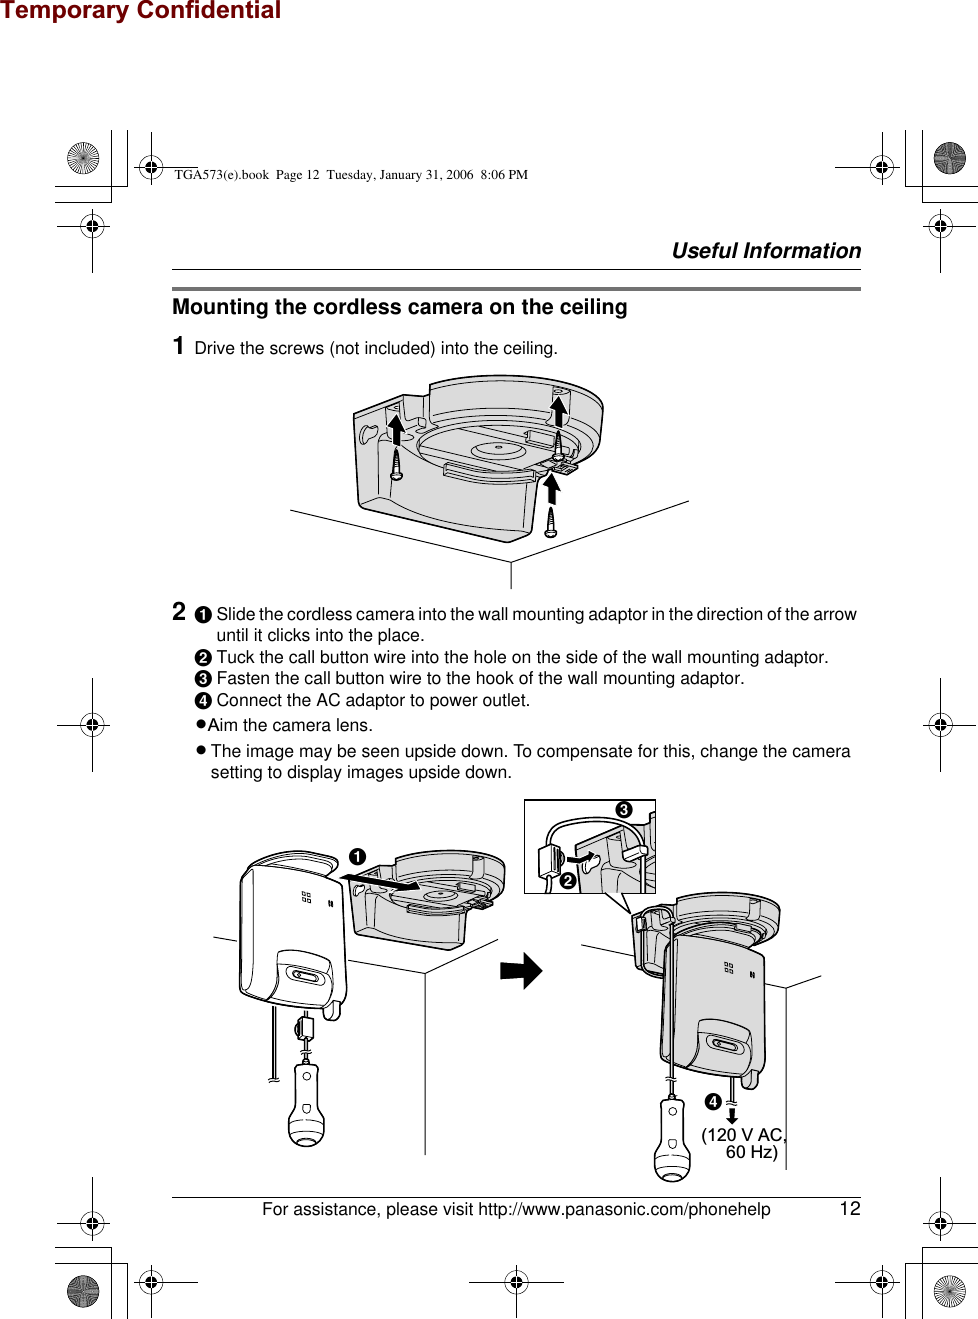 Temporary ConfidentialUseful InformationFor assistance, please visit http://www.panasonic.com/phonehelp 12Mounting the cordless camera on the ceiling1Drive the screws (not included) into the ceiling.2ASlide the cordless camera into the wall mounting adaptor in the direction of the arrow until it clicks into the place.BTuck the call button wire into the hole on the side of the wall mounting adaptor.CFasten the call button wire to the hook of the wall mounting adaptor.DConnect the AC adaptor to power outlet.LAim the camera lens.LThe image may be seen upside down. To compensate for this, change the camera setting to display images upside down. (120 V AC,      60 Hz)BACDTGA573(e).book  Page 12  Tuesday, January 31, 2006  8:06 PM